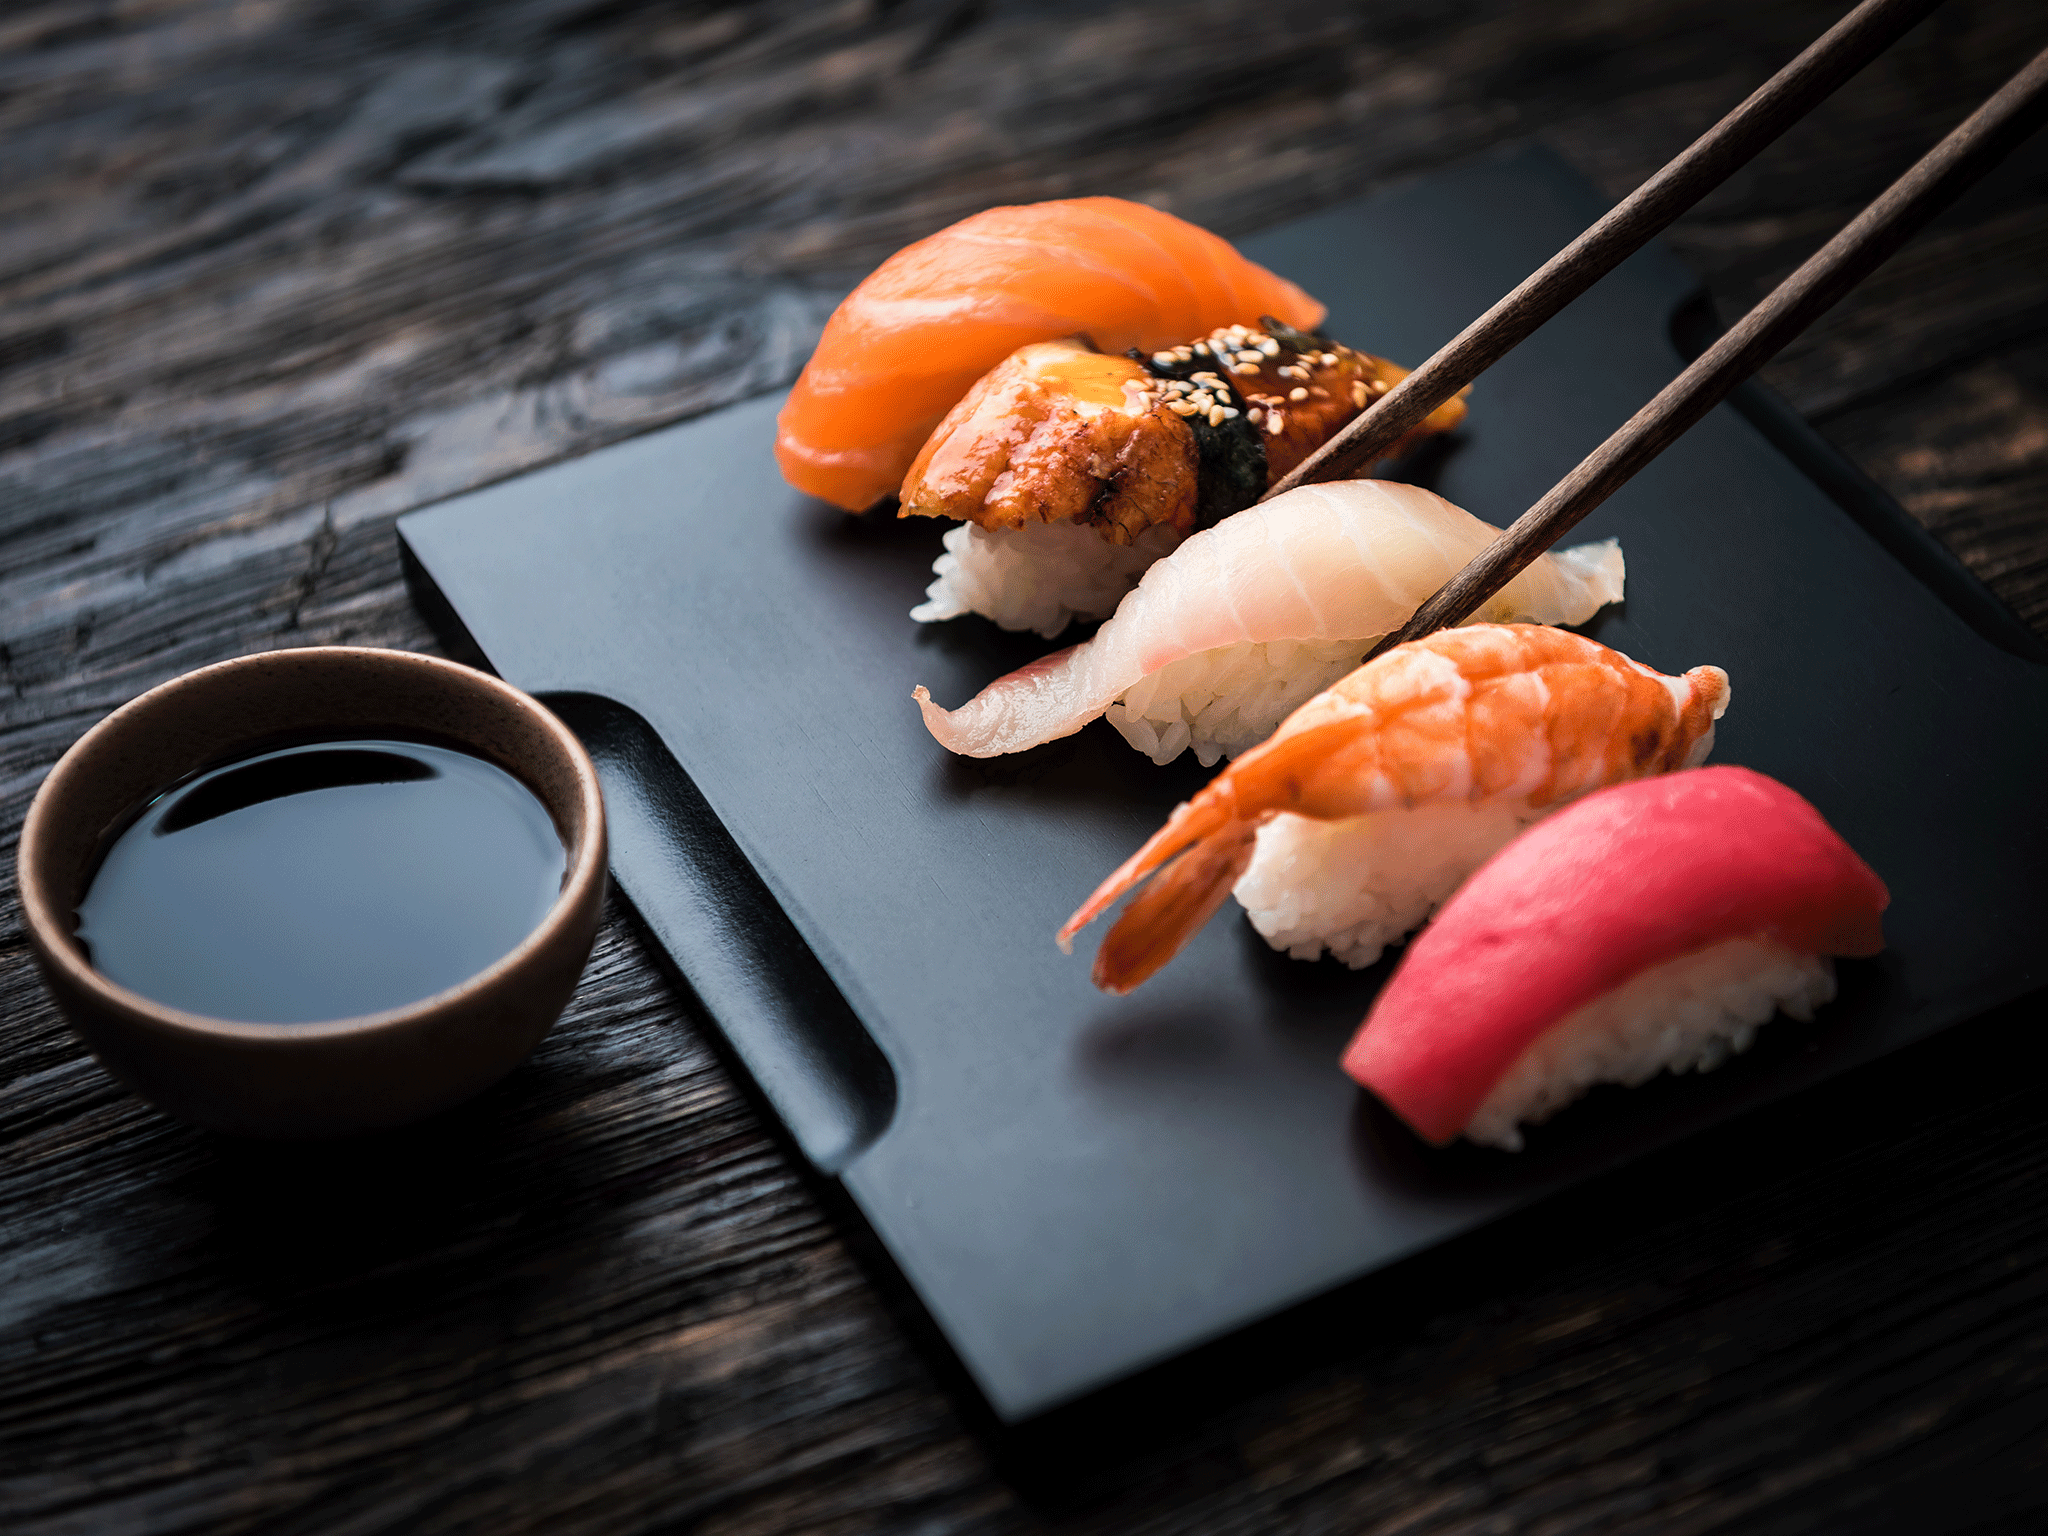 The biggest mistakes when eating Japanese food, according to top chefs